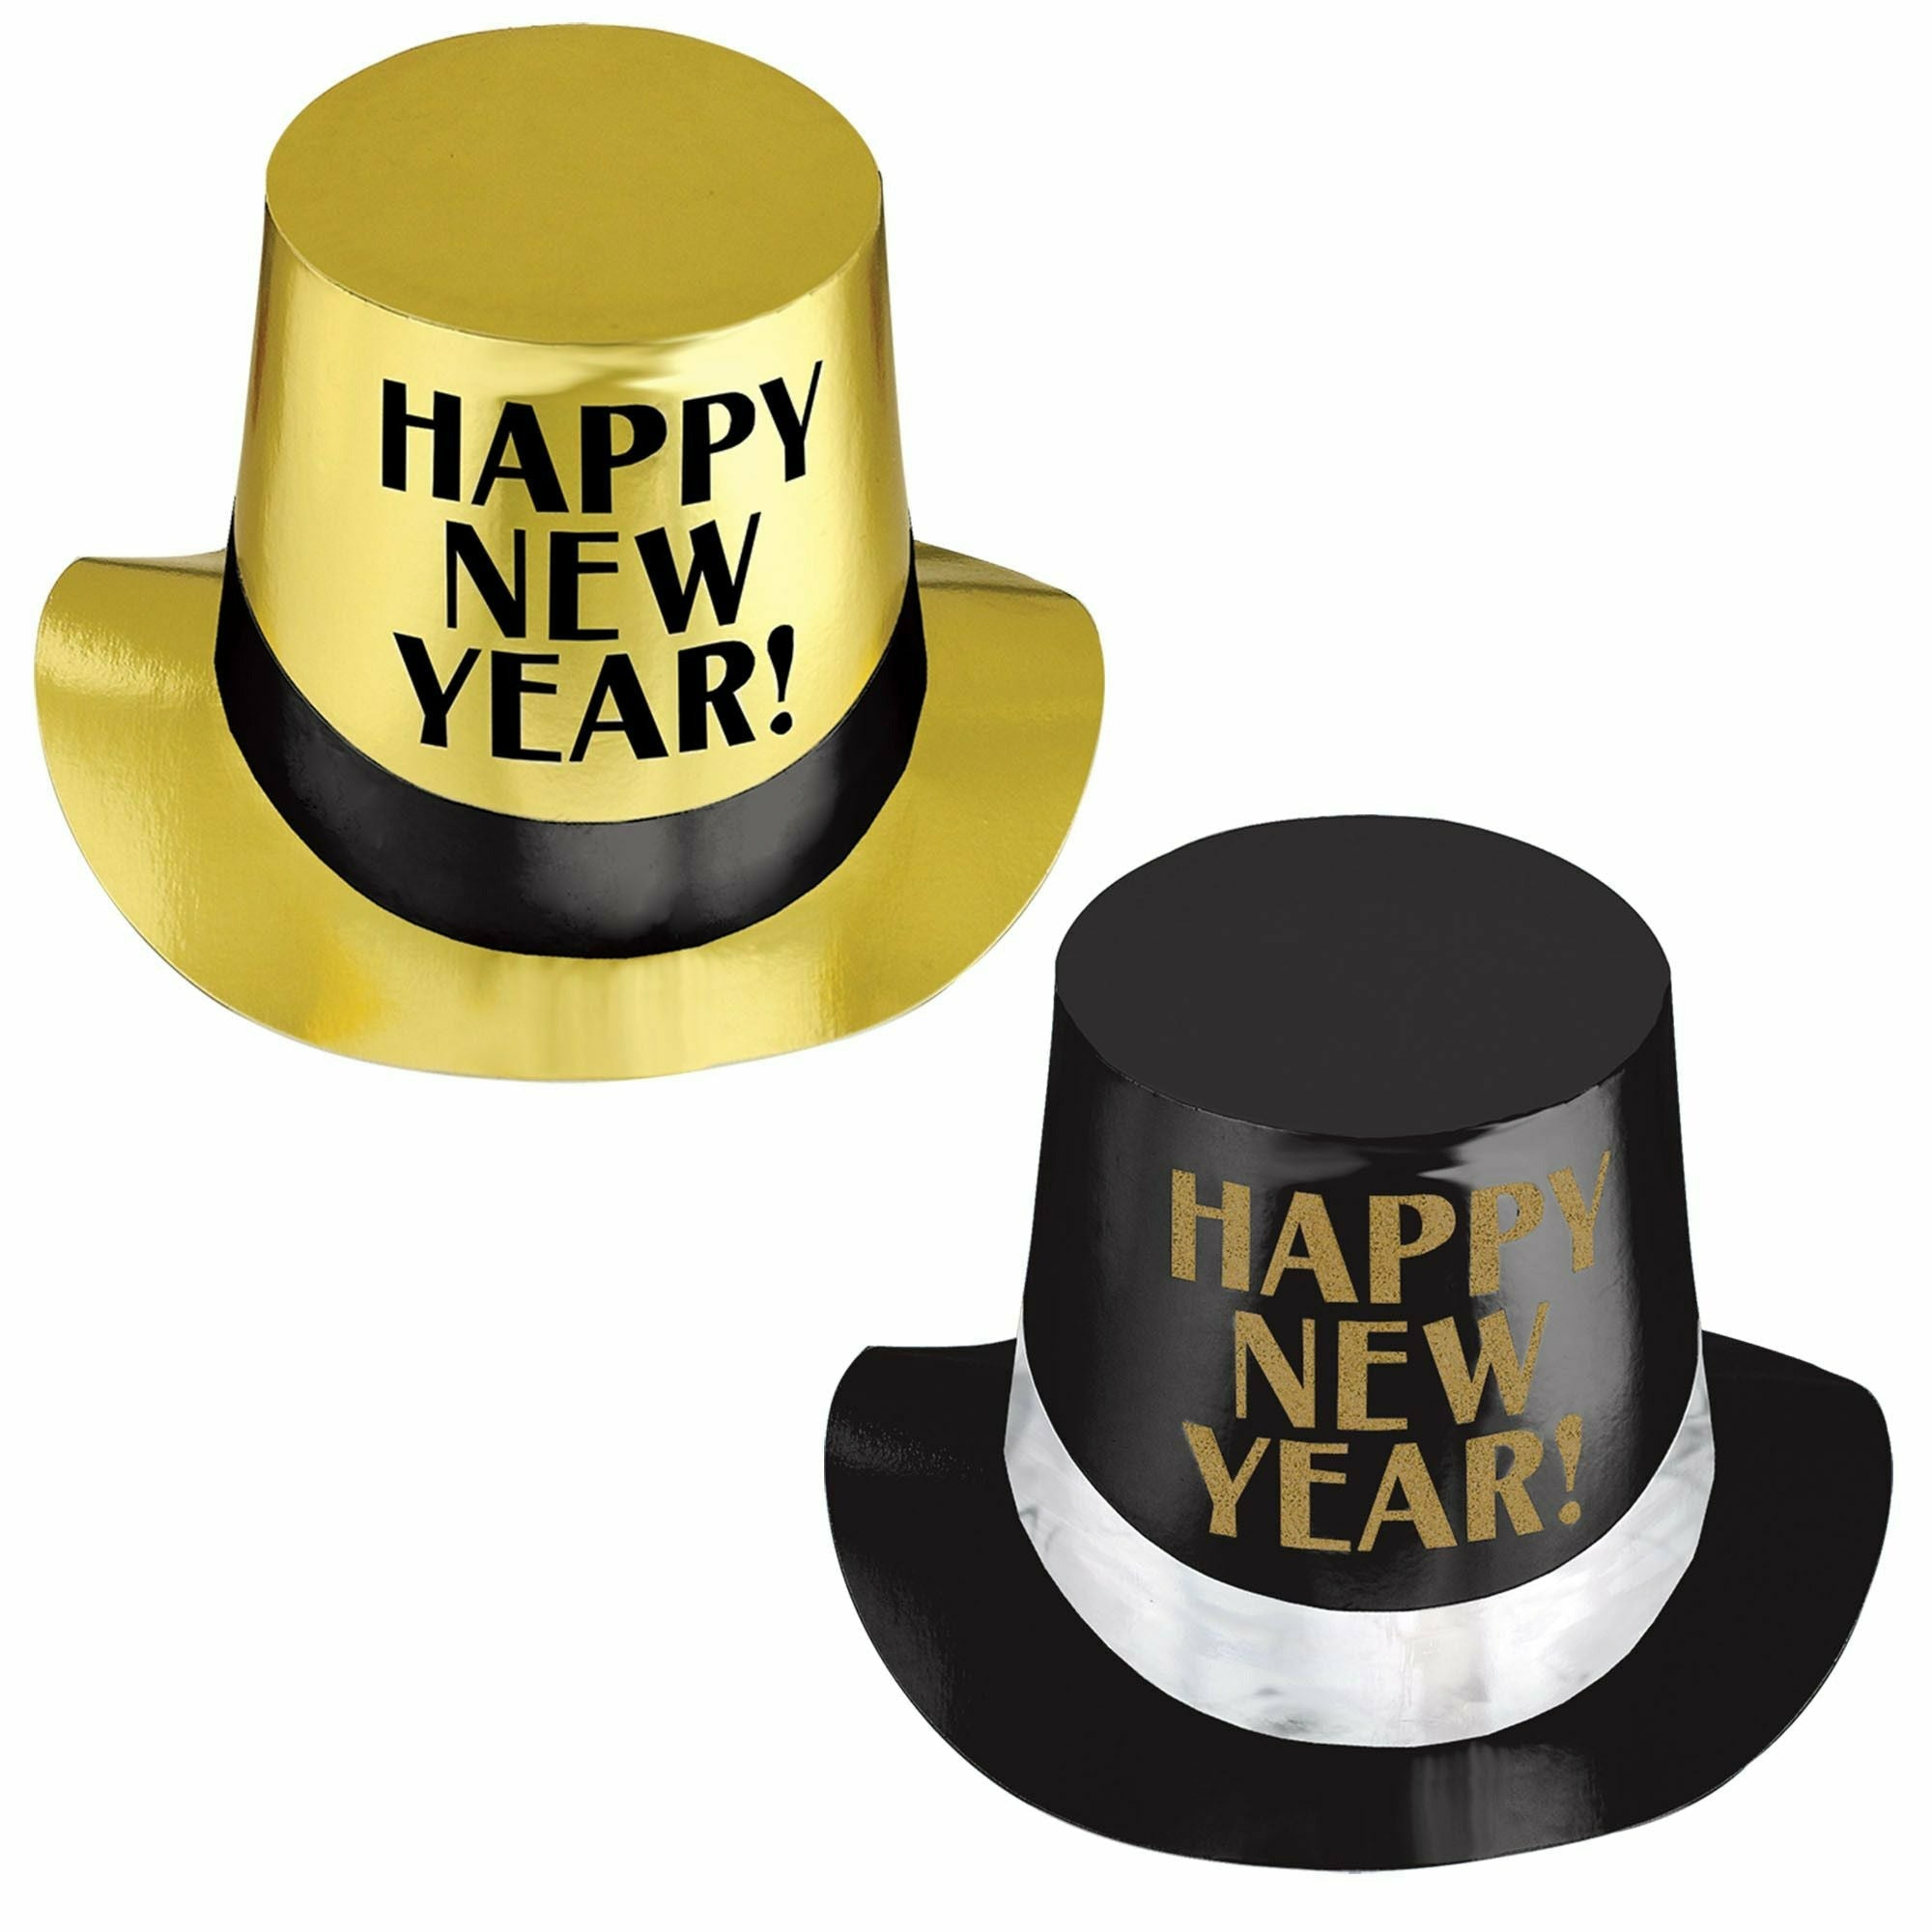 Amscan HOLIDAY: NEW YEAR'S Happy New Year Top Hats, Asst.